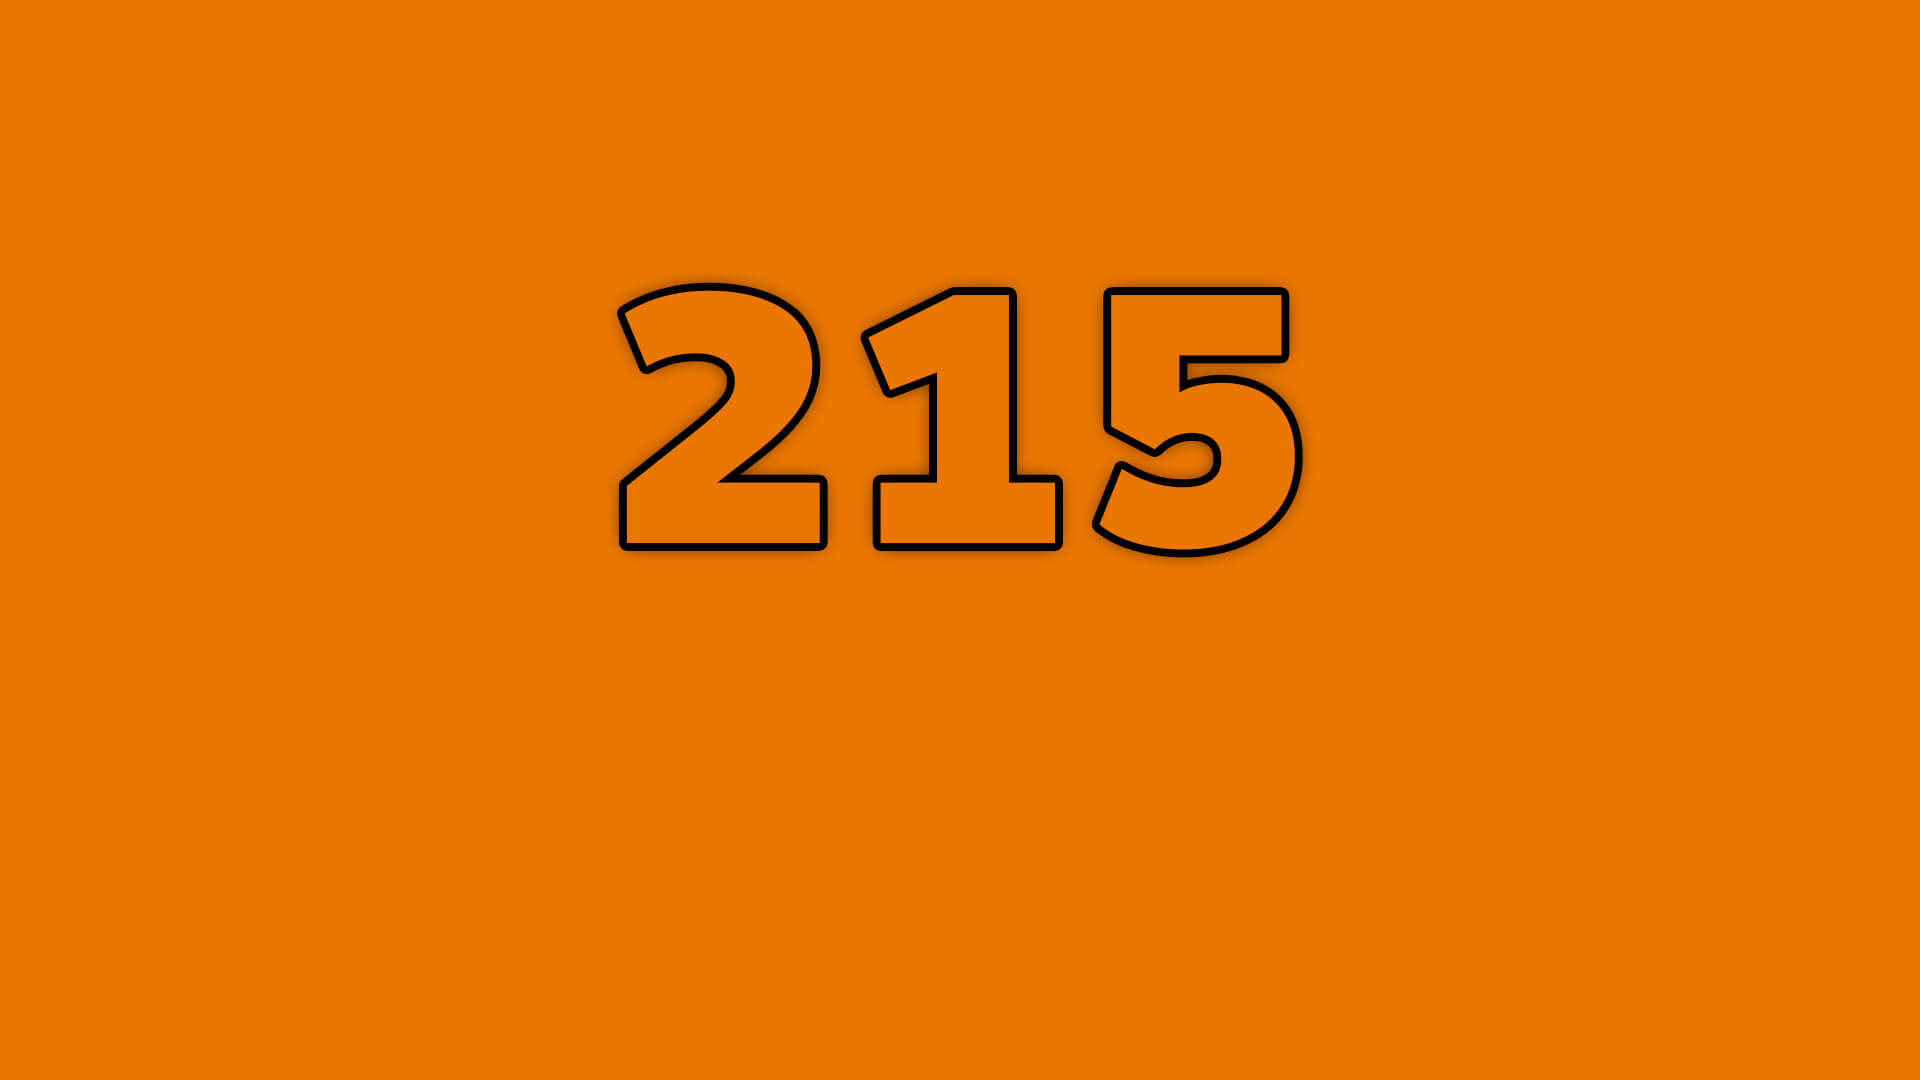 Orange rectangle with the number 215 in a black outline